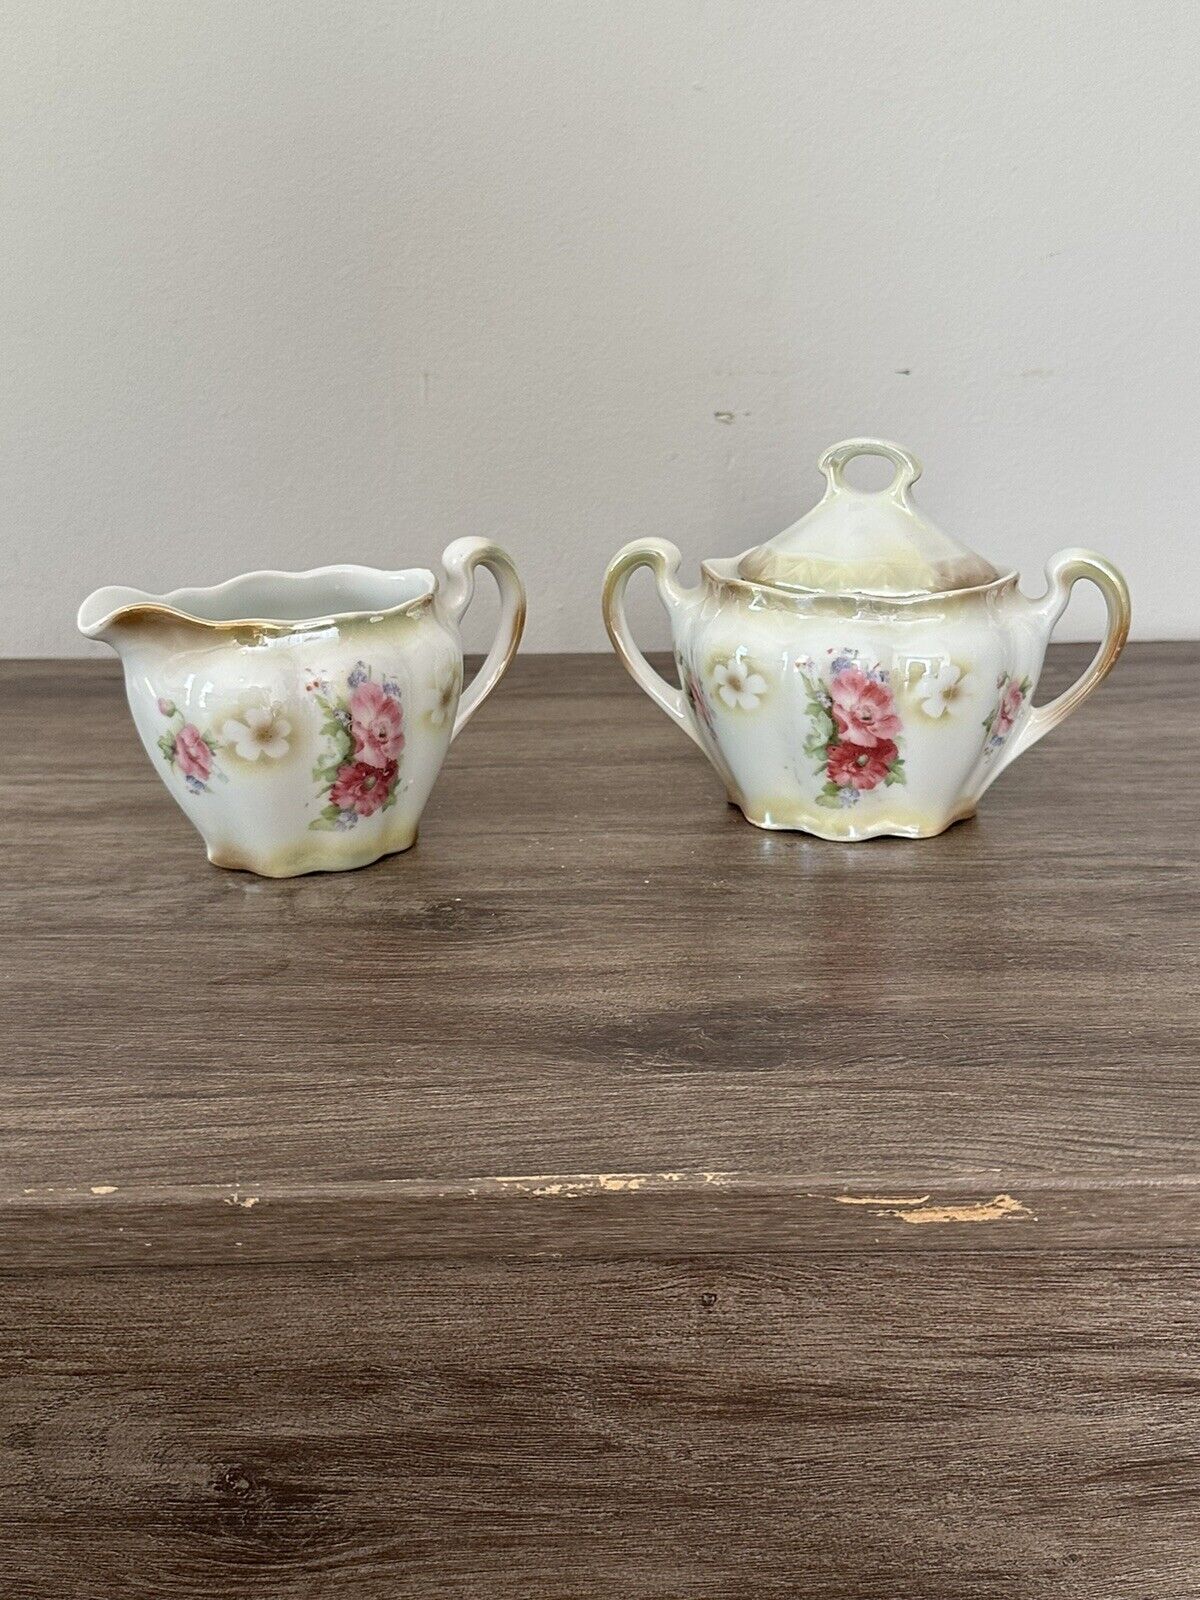 Vintage Set of 2 Ceramic Floral Creamer and Sugar bowl Made in Germany 3.5”T